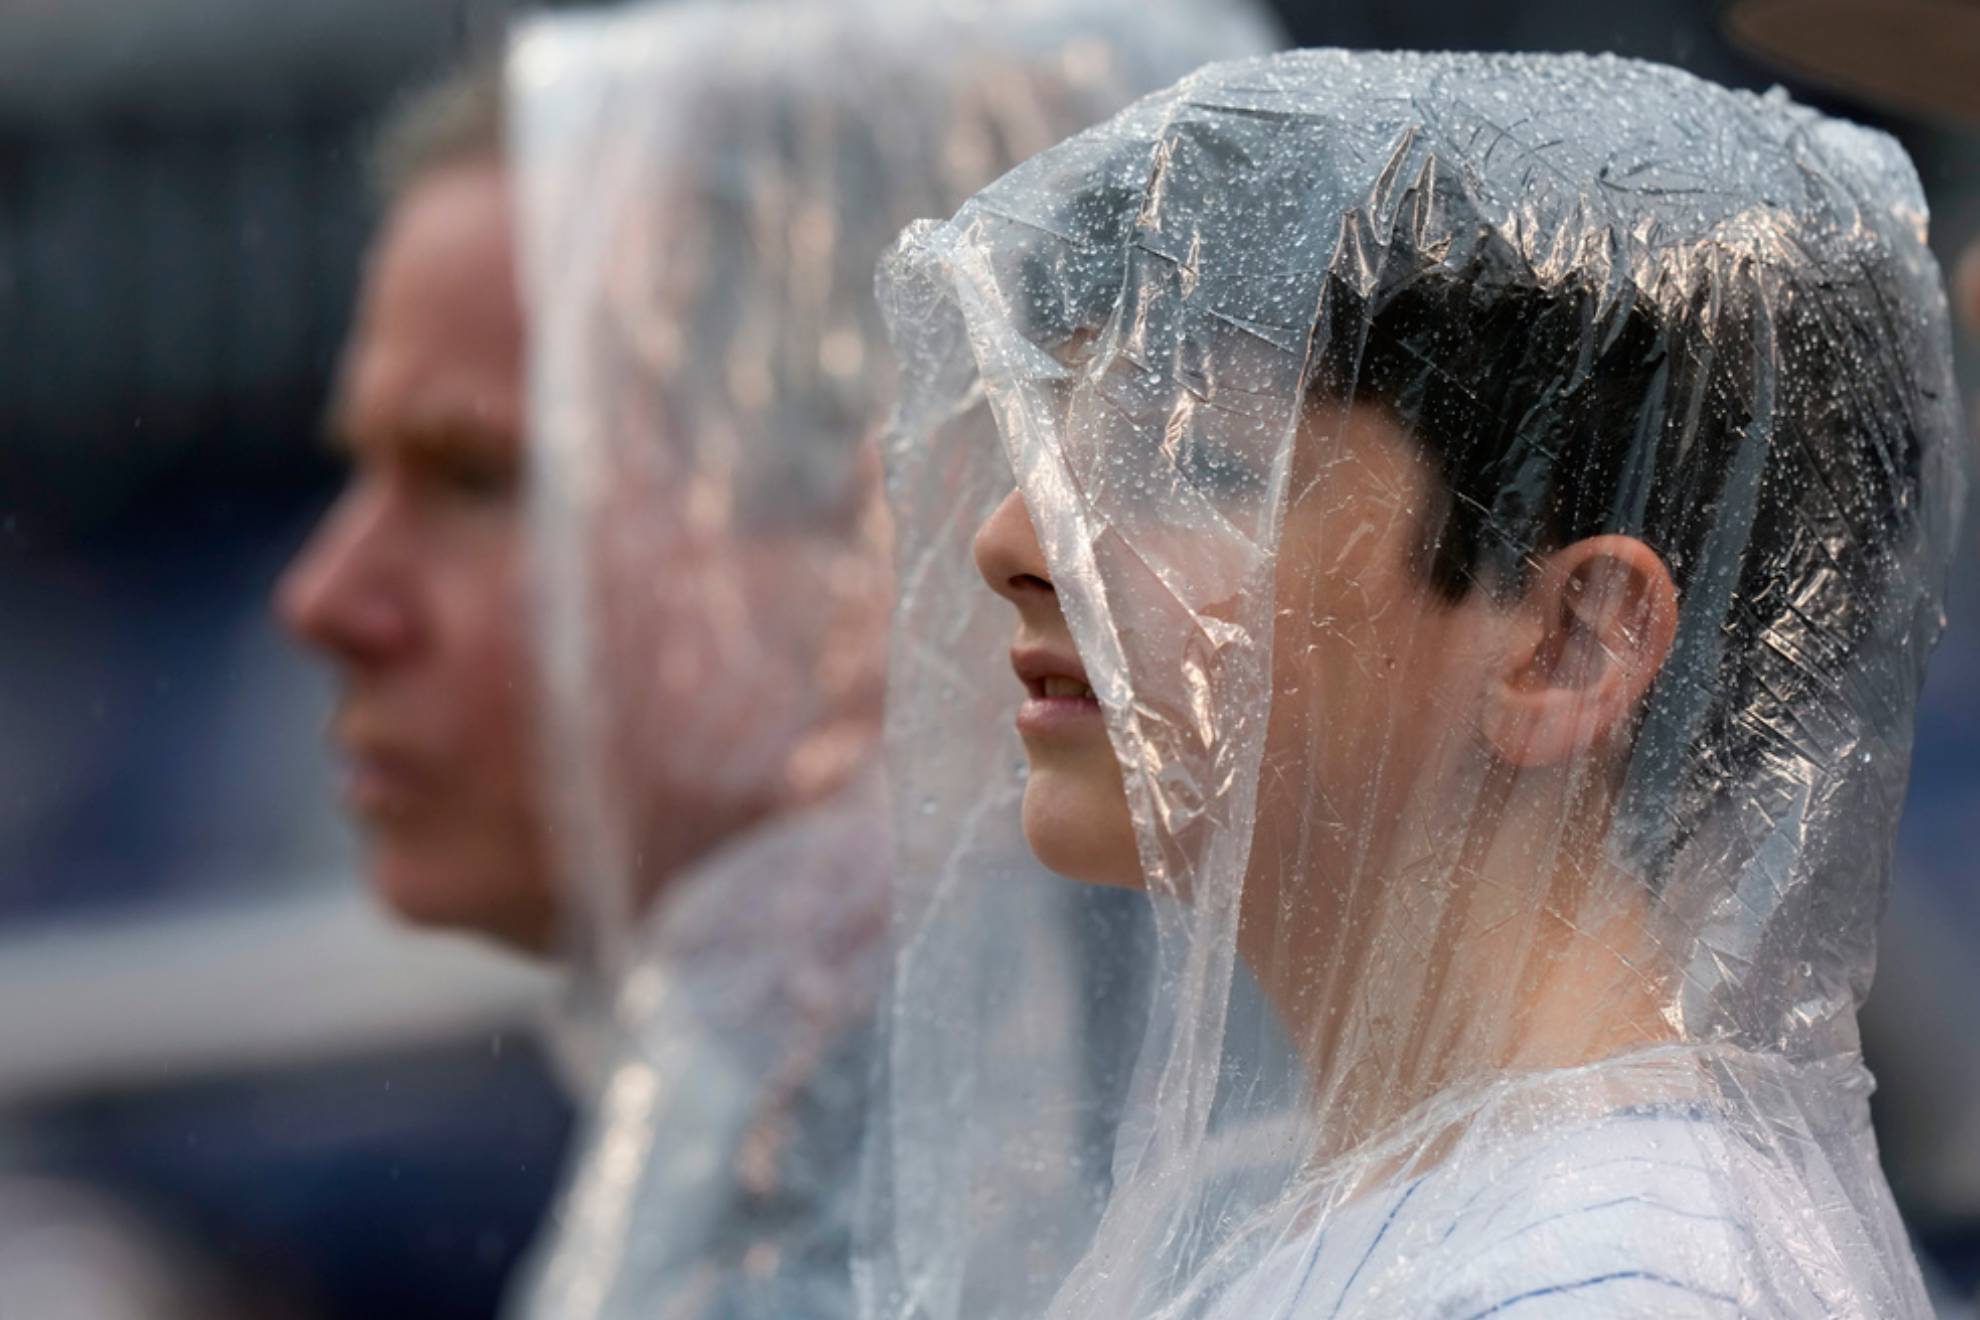 Fans wear rain ponchos during the first inning of a baseball game between the Washington Nationals and the New York Mets